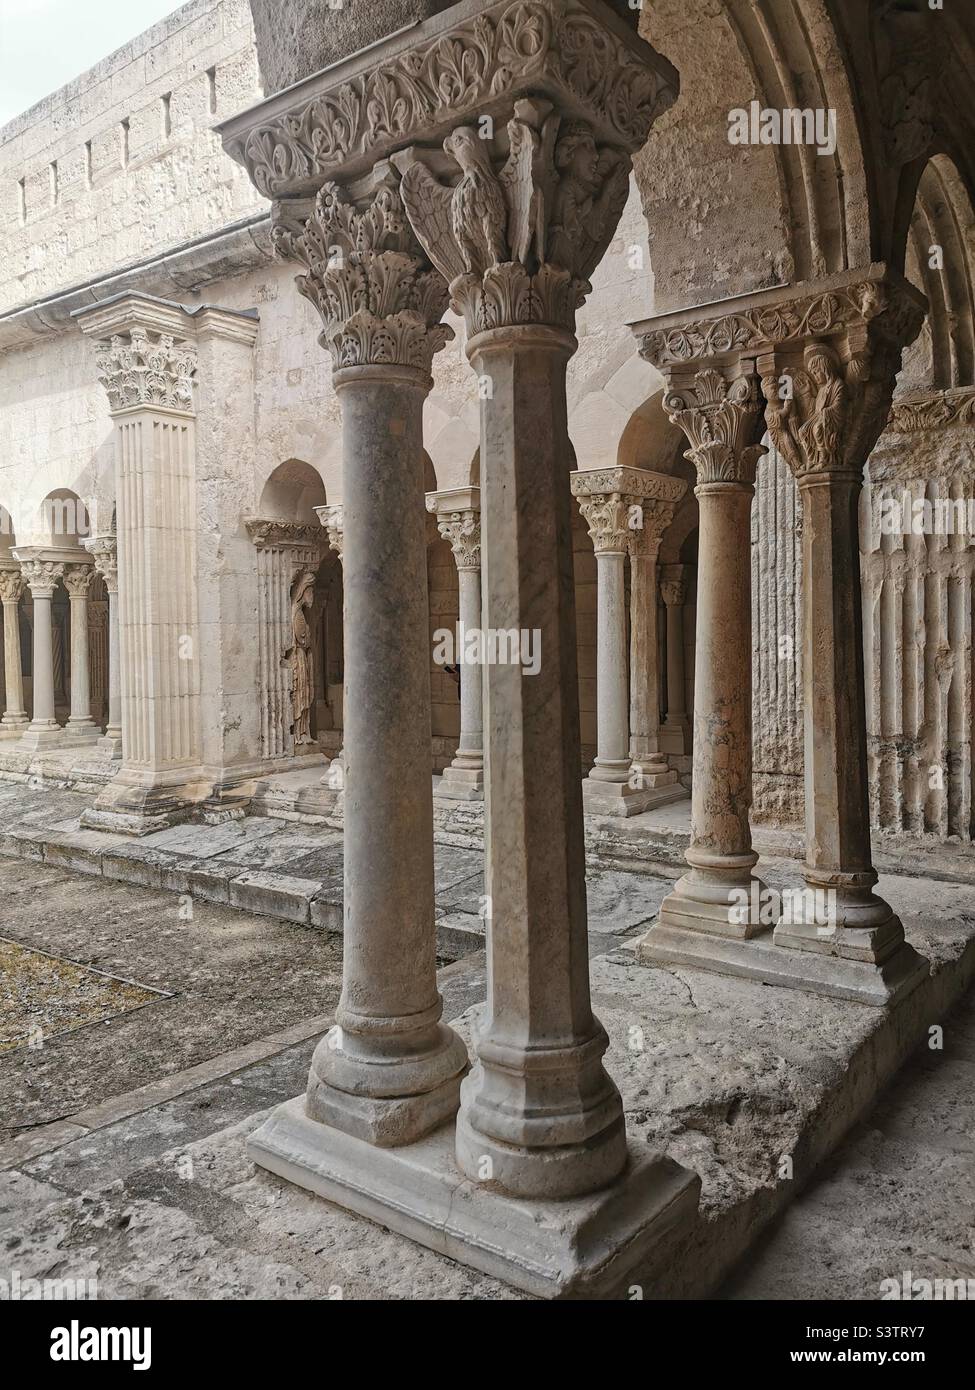 antique columns in Convent courtyard Stock Photo